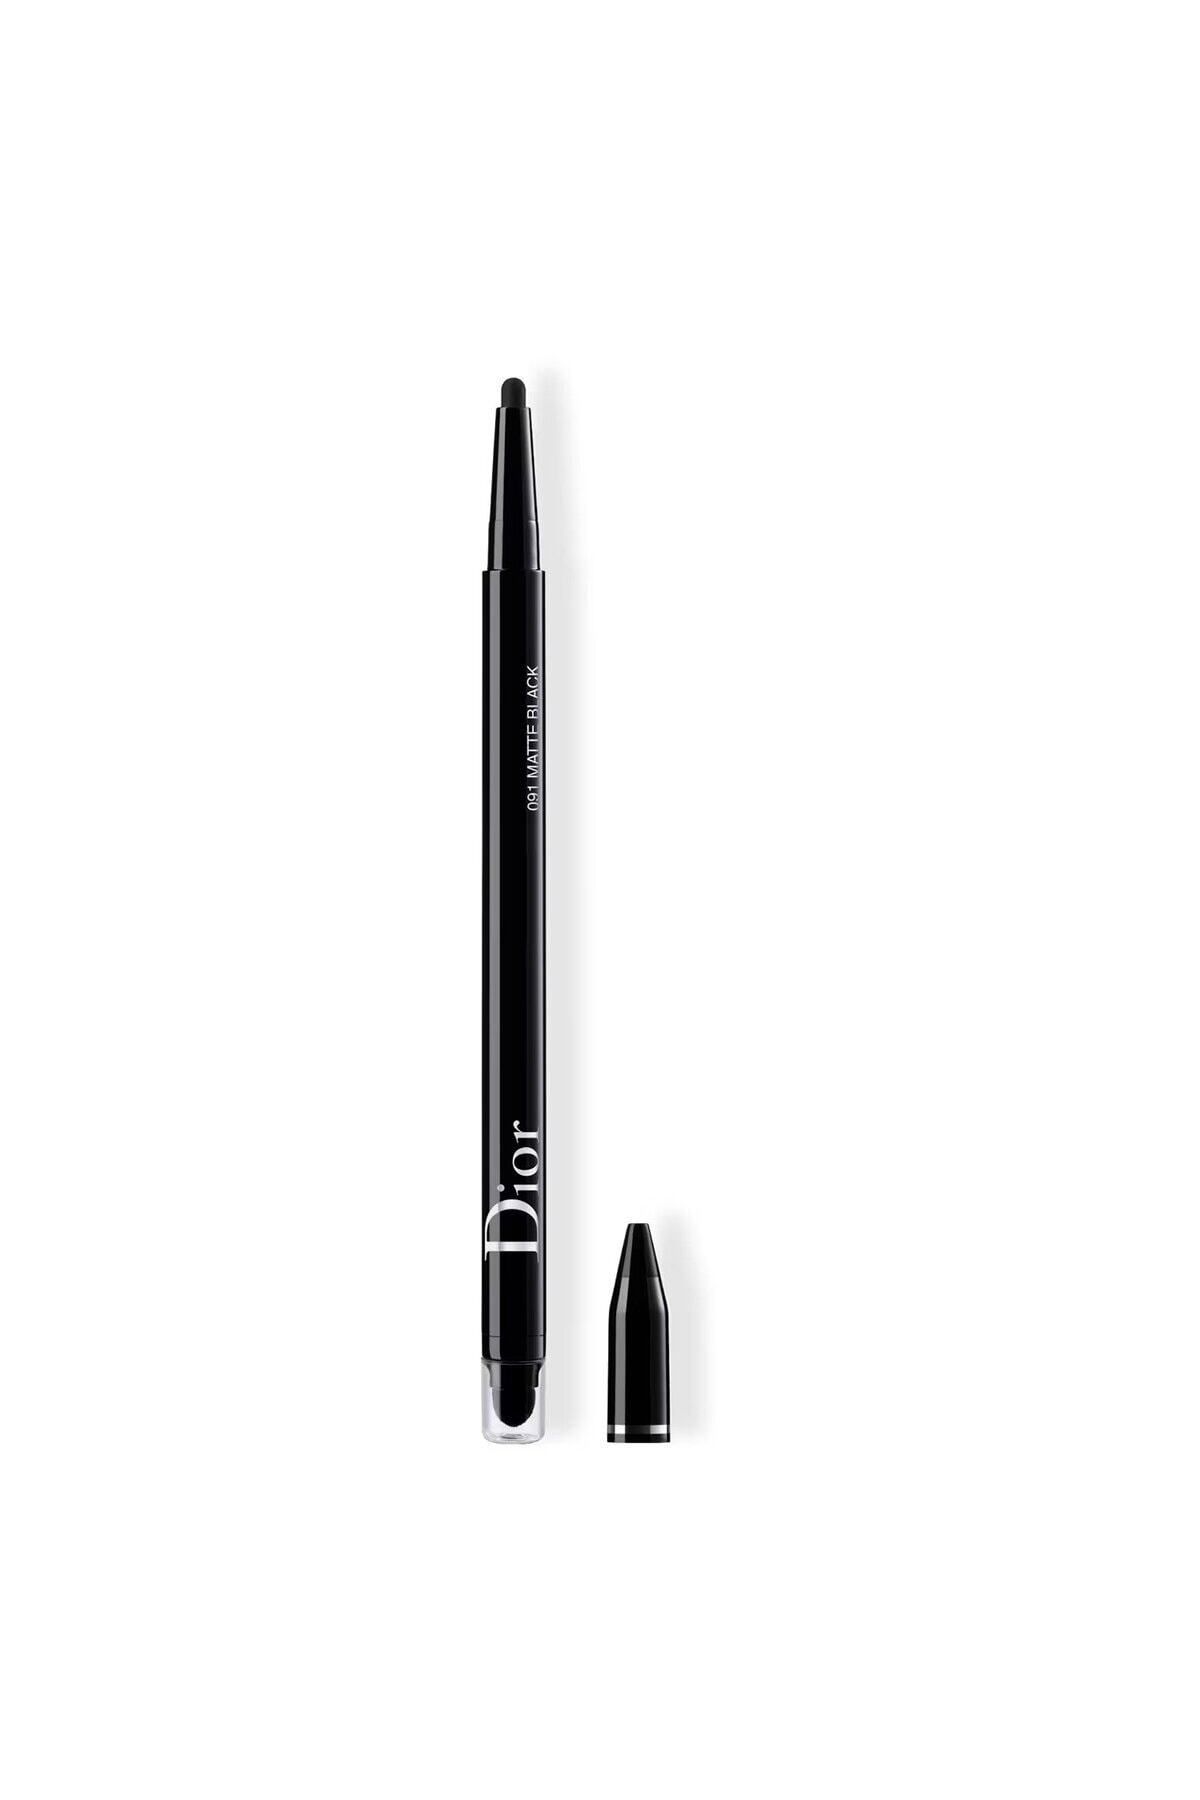 Dior SHOW 24H* STYLO WATERPROOF - 24 HOUR LASTİNG AND HİGH INTENSİTY APPEARANCE EYELİNER PSSN1952